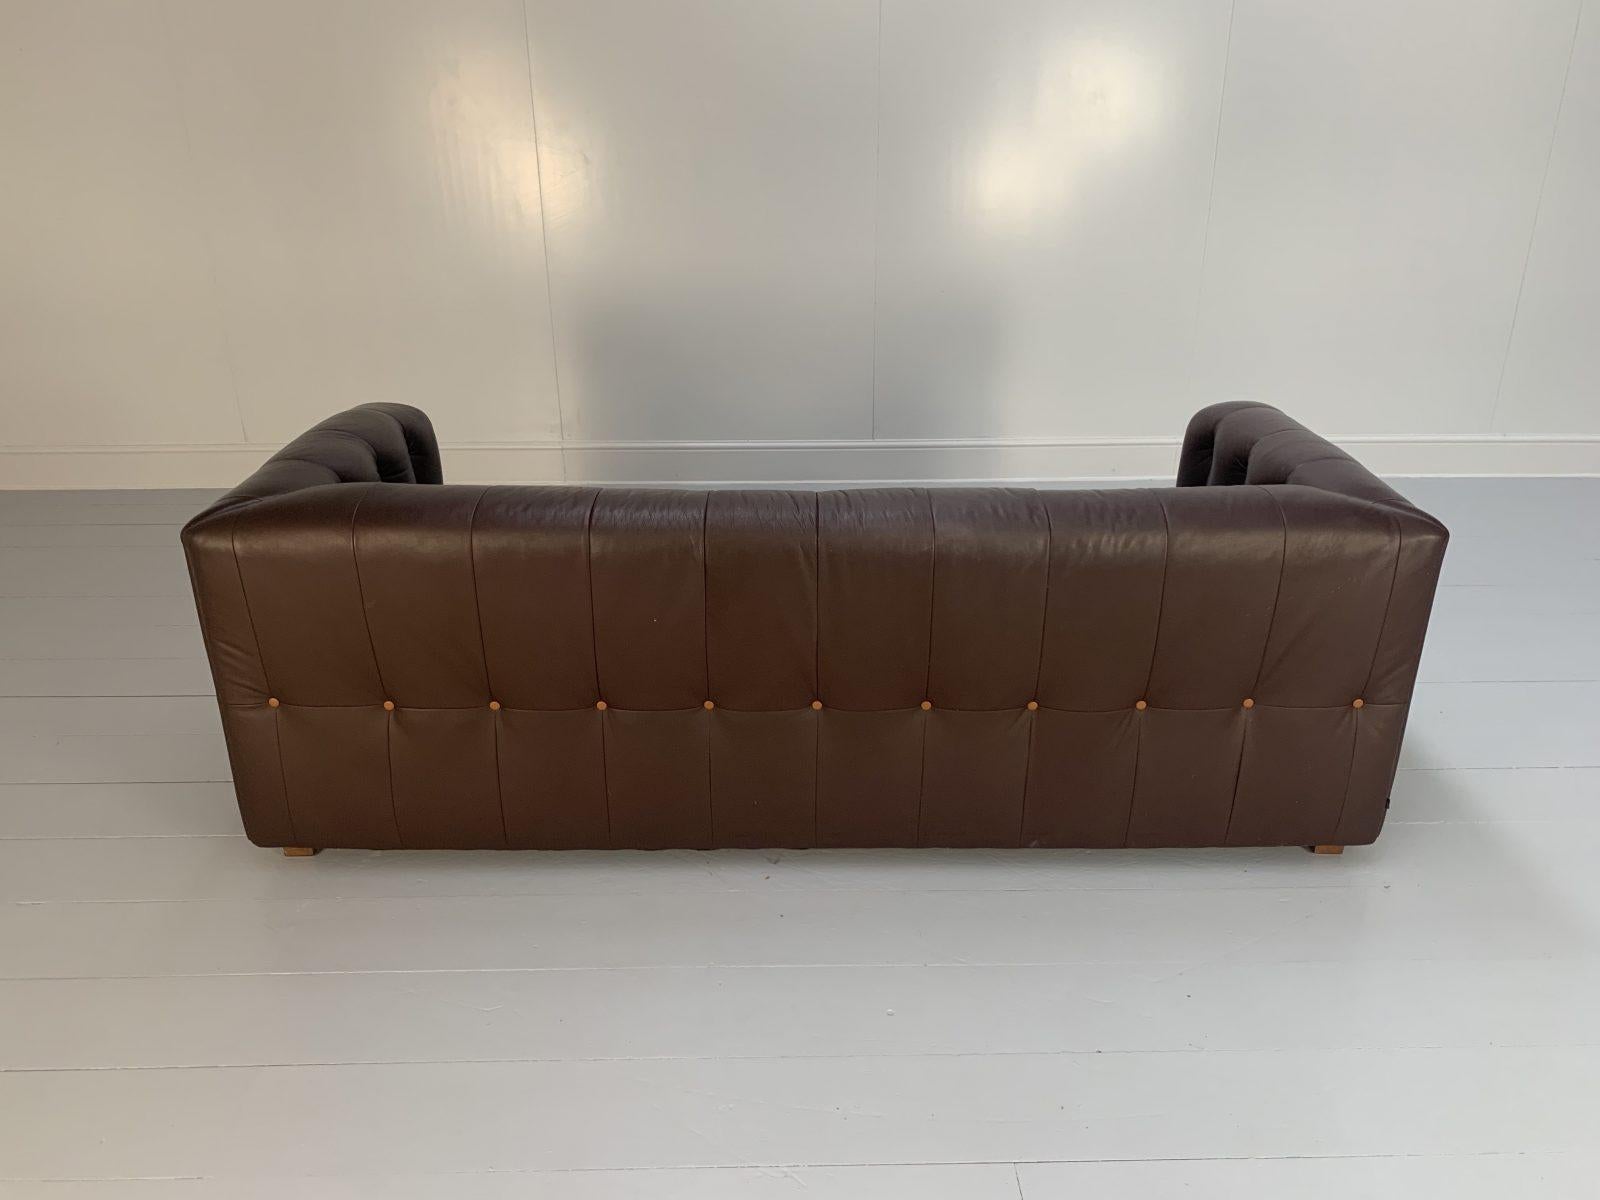 David Linley “Yoxford” Chesterfield 3-Seat Sofa in Brown Leather For Sale 4